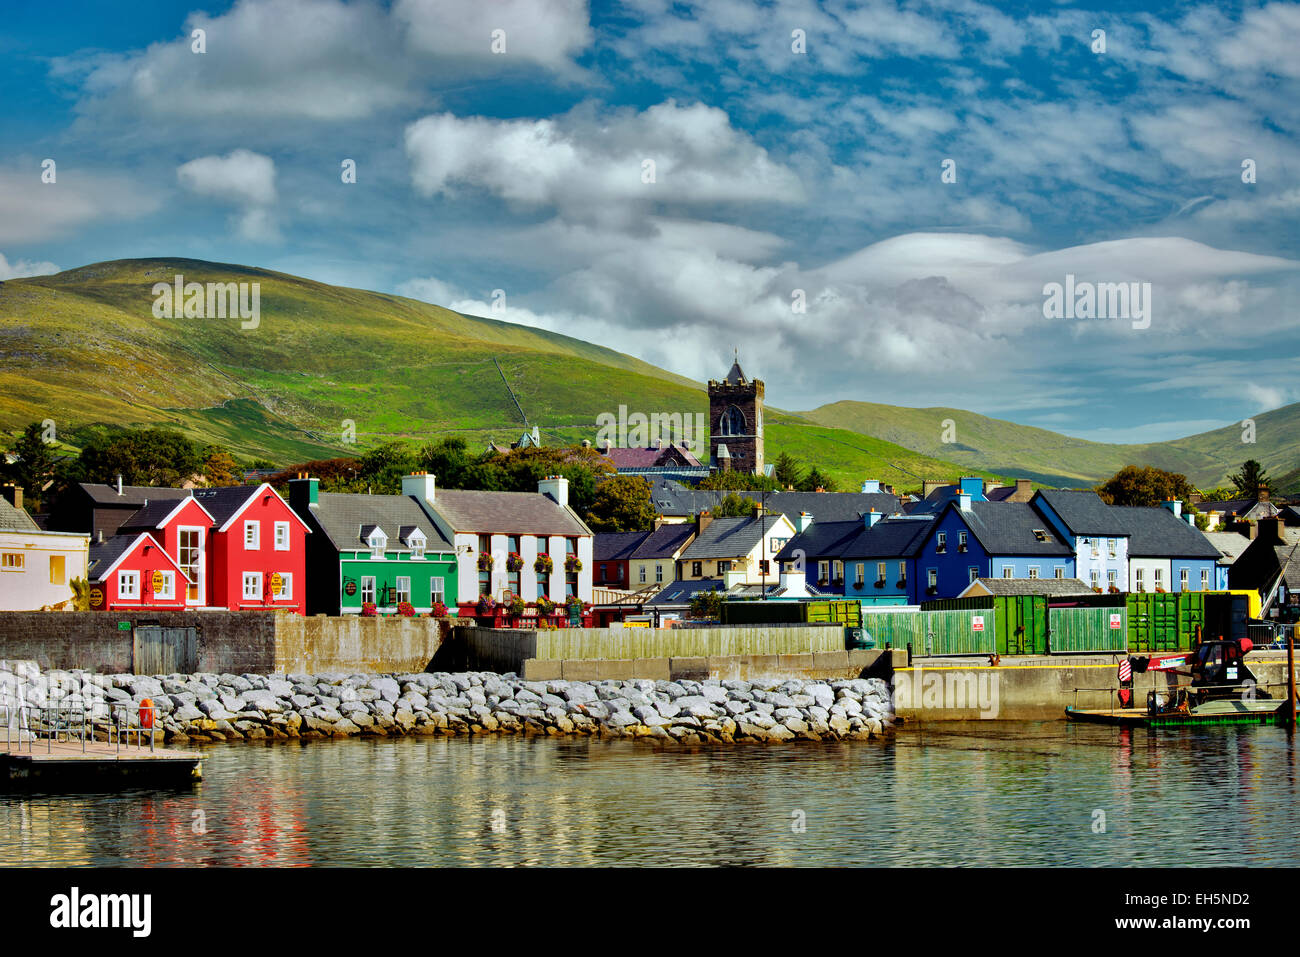 The town of Dingle and bay. Ireland Stock Photo